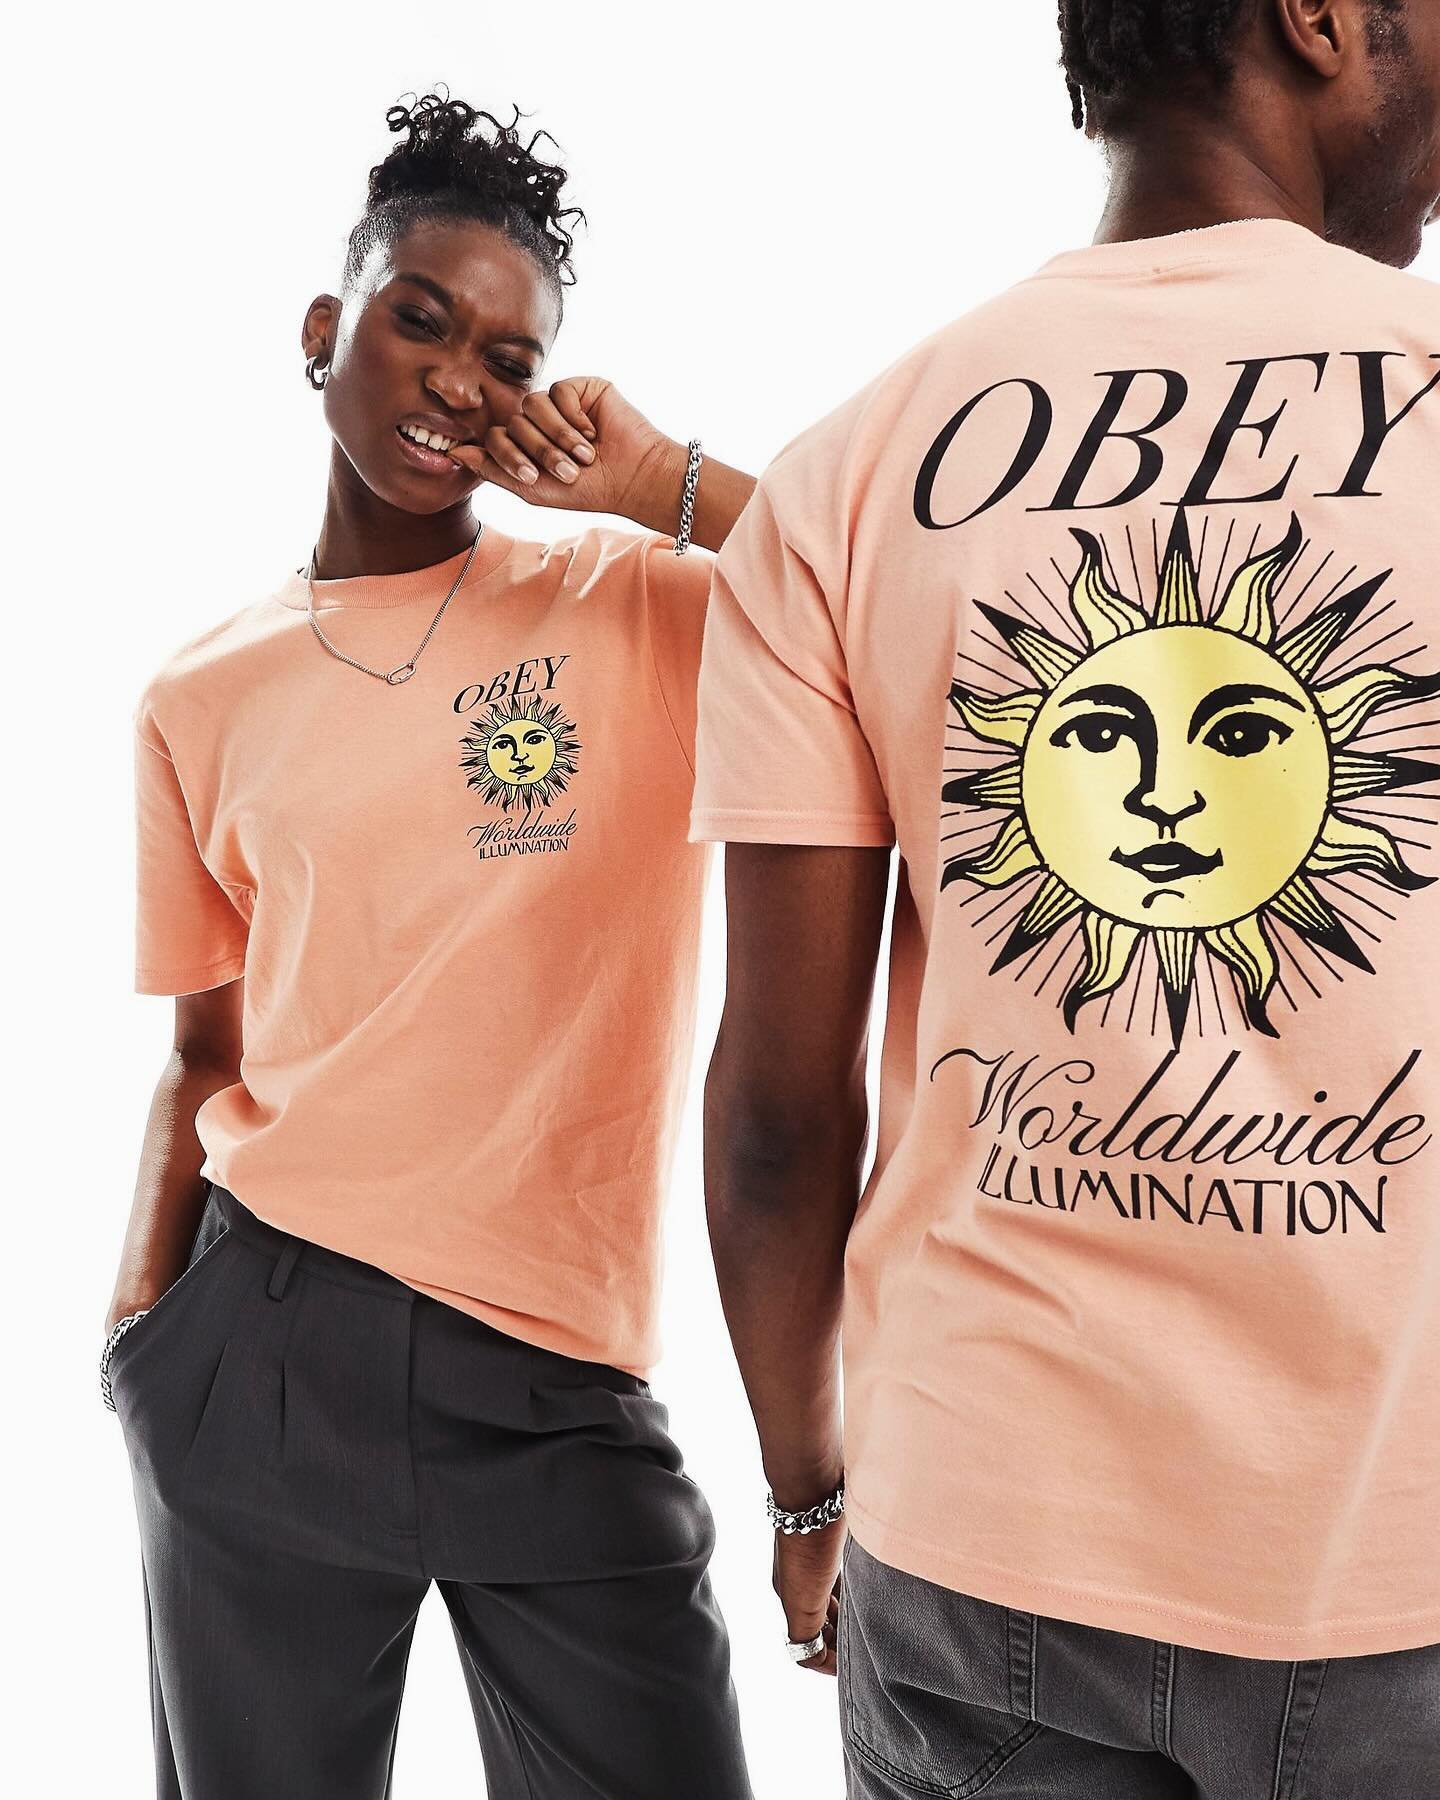 LOVE the SUN 🌞 LOVE @obeyclothing 🔥